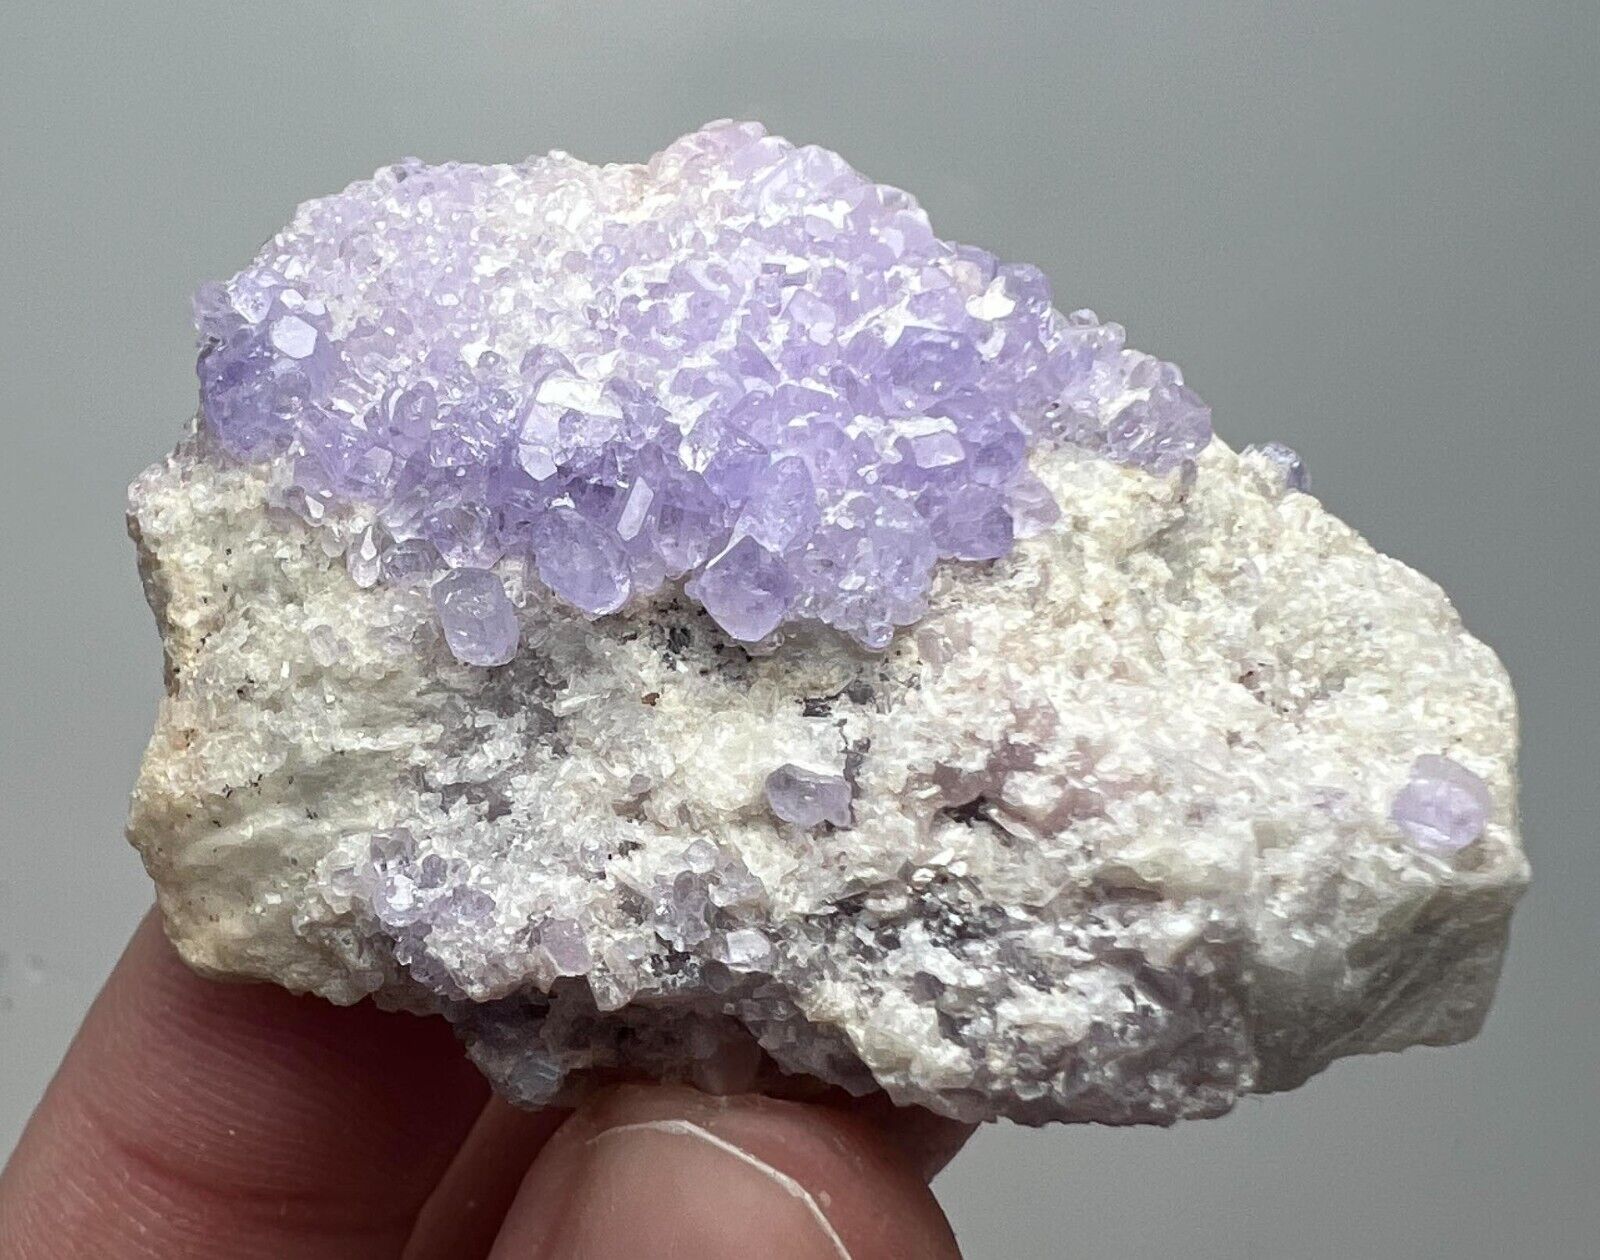 Rare Full Terminated Apatite Crystals' Cluster Plate with Lepidolite on Matrix